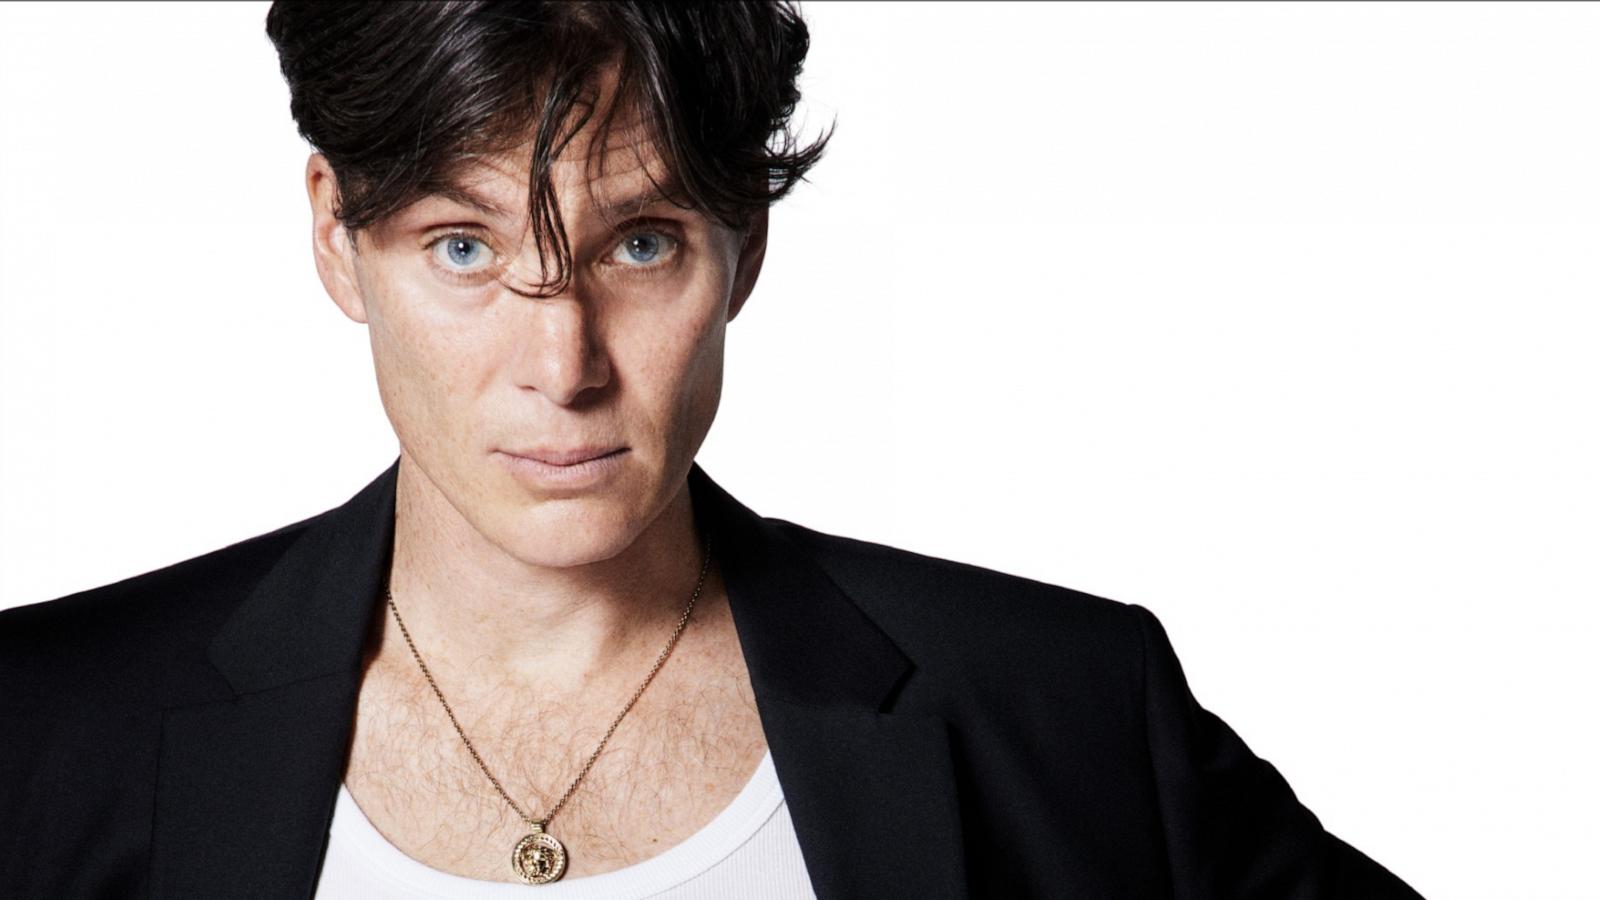 PHOTO: Cillian Muprhy stars in the new Versace Icons collection campaign.